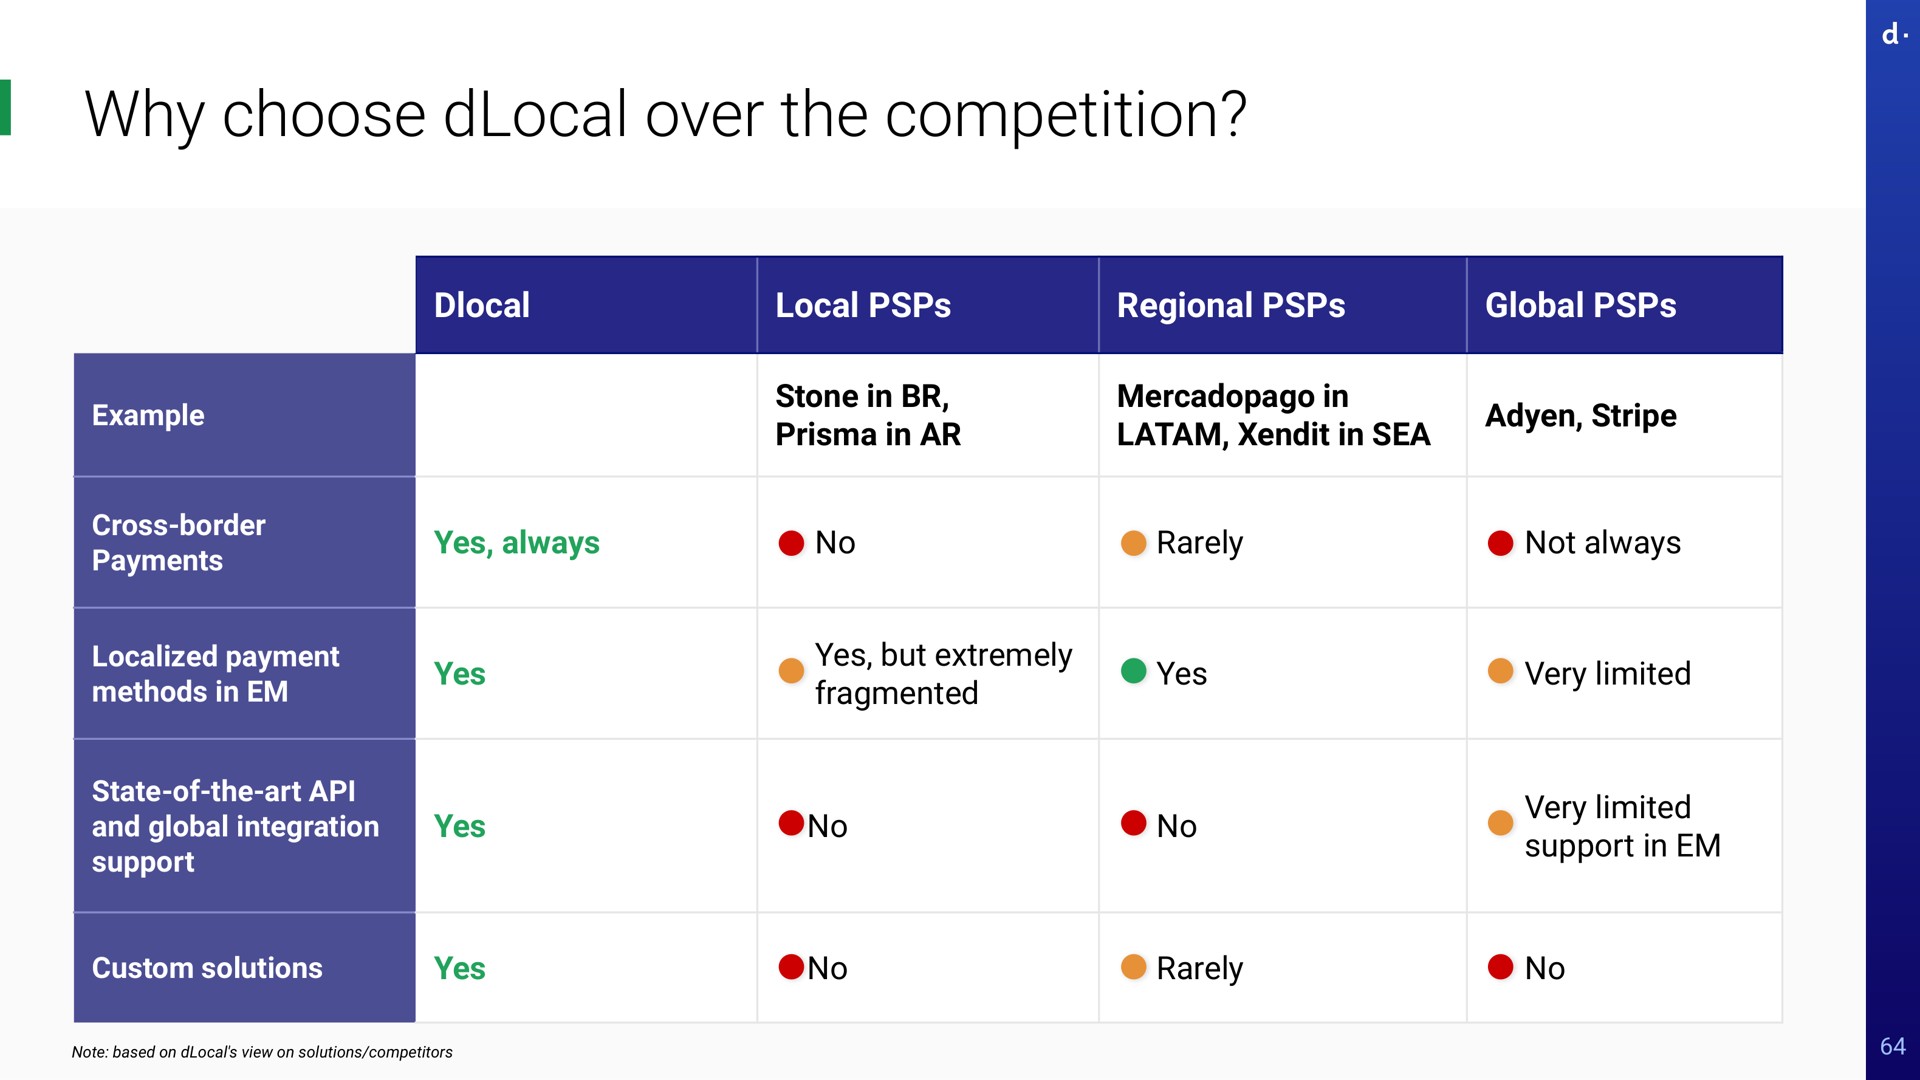 why choose over the competition local regional global stone in in in in sea stripe yes always no rarely not always example cross border payments localized payment methods in state of the art and global integration support yes yes custom solutions yes yes but extremely fragmented yes very limited no no no very limited support in rarely no be insea a shee see note based on view on competitors | dLocal